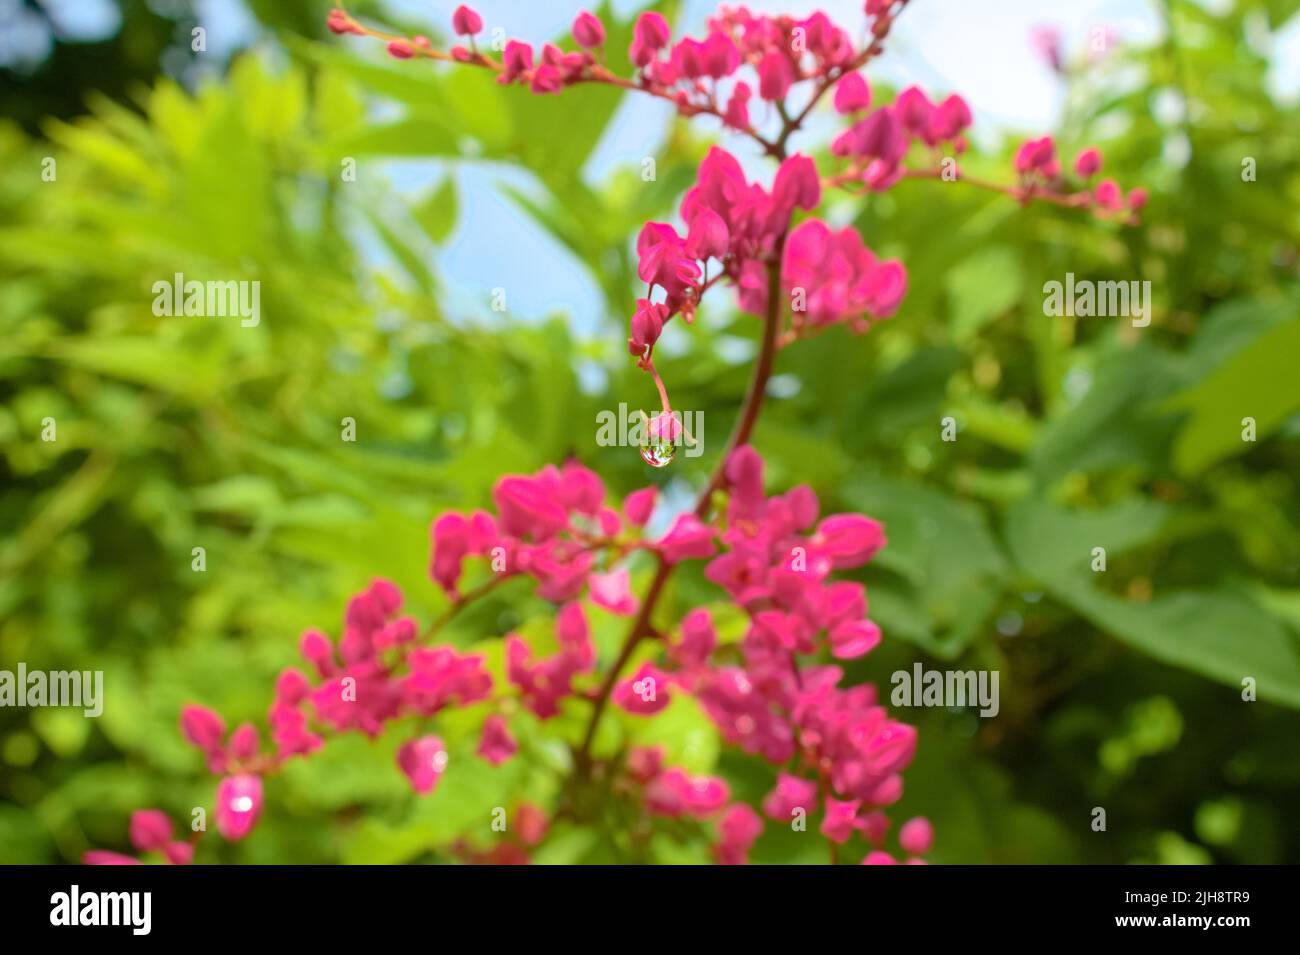 The pink flowers of the Antigonon leptopus growing in the garden Stock Photo